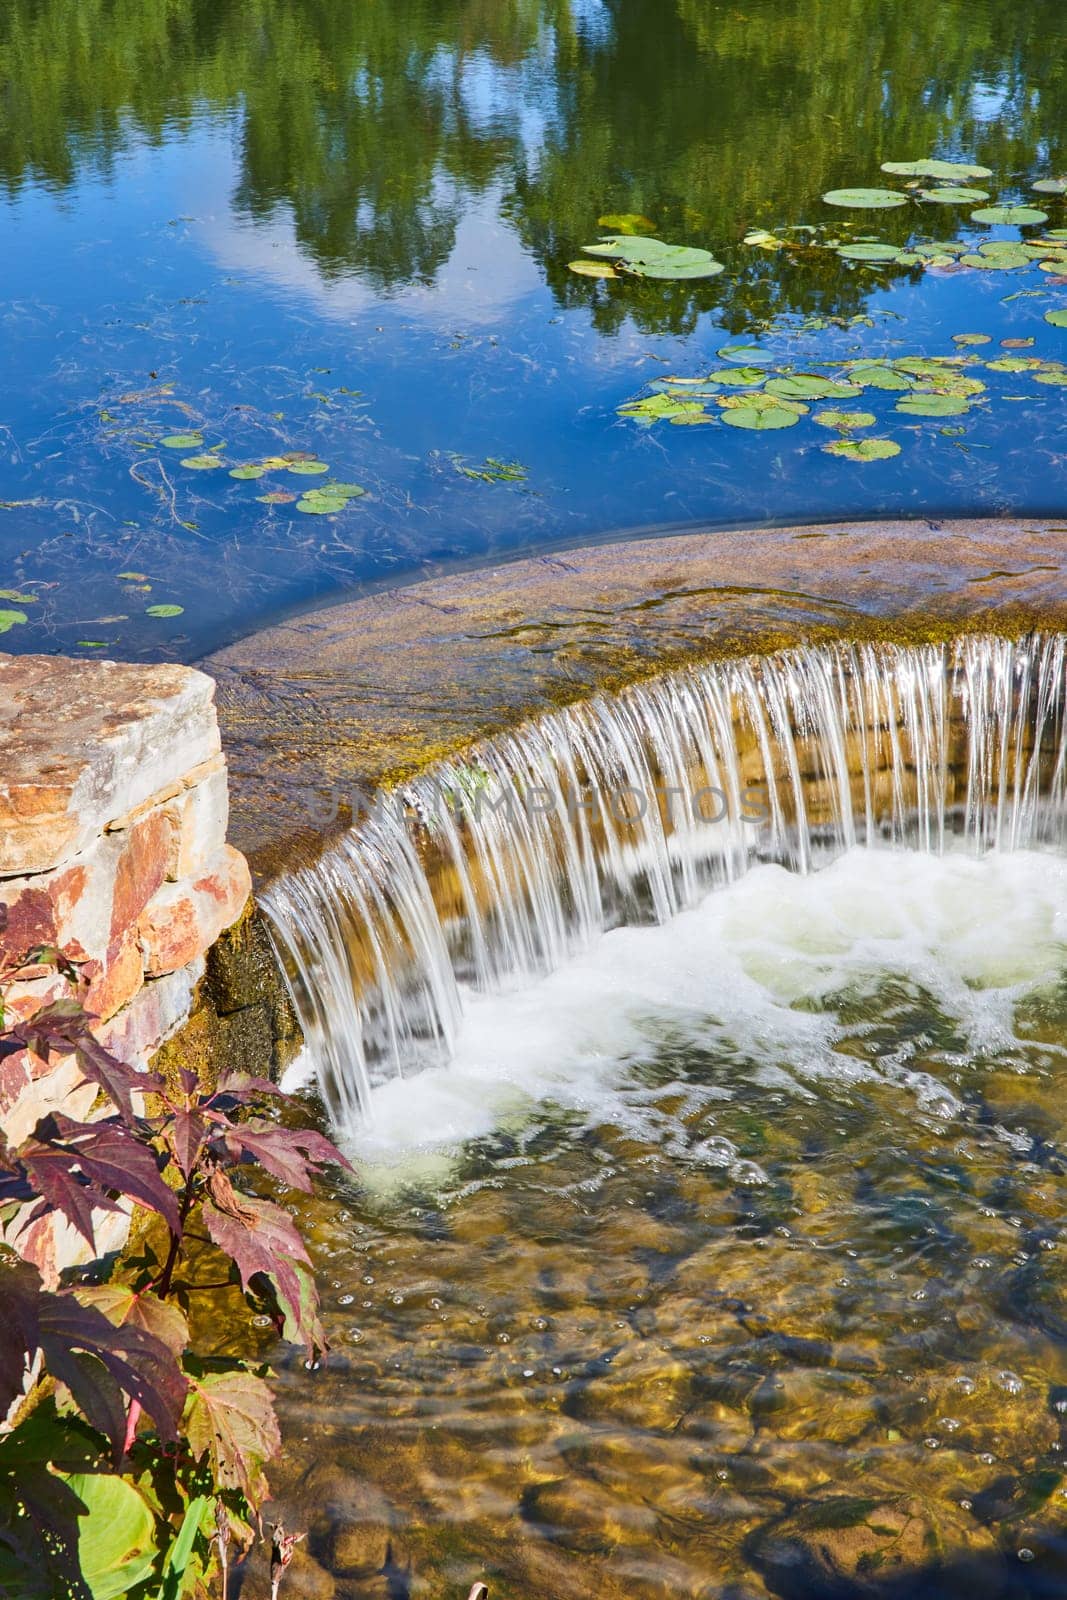 Tranquil Waterfall and Reddish Leaves in Natural Setting by njproductions